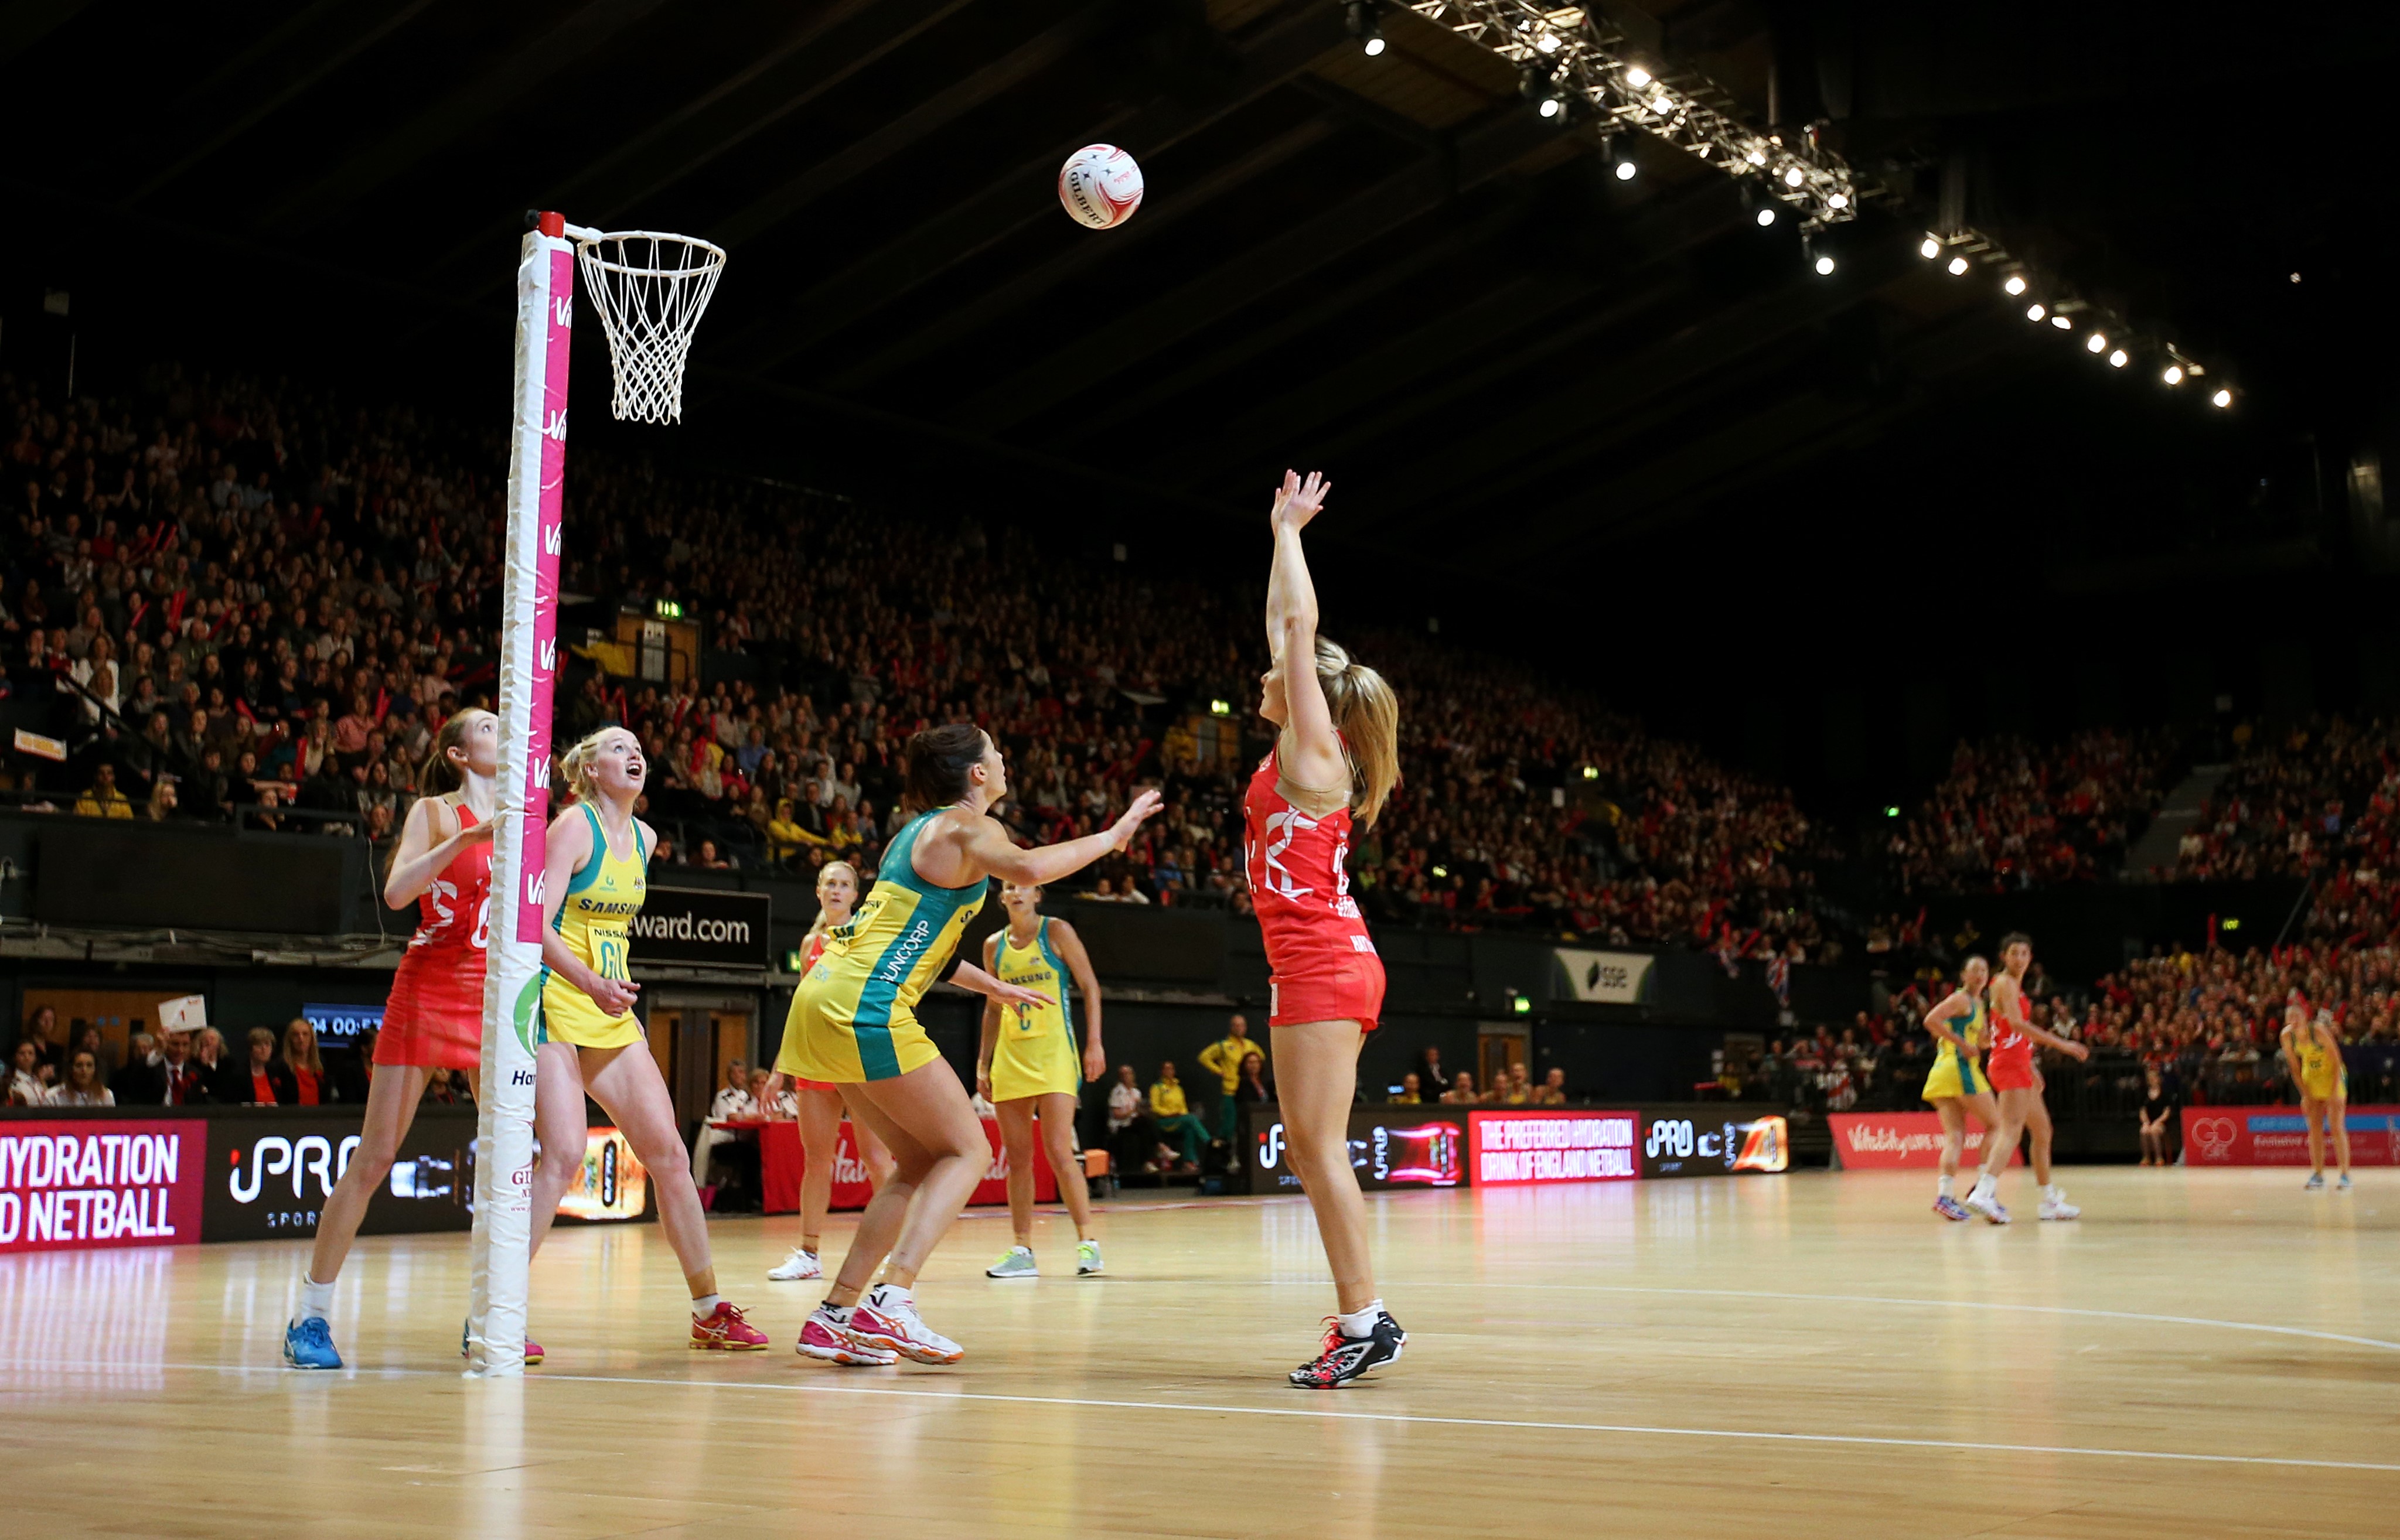 a-beginner-s-guide-to-netball-positions-fupping